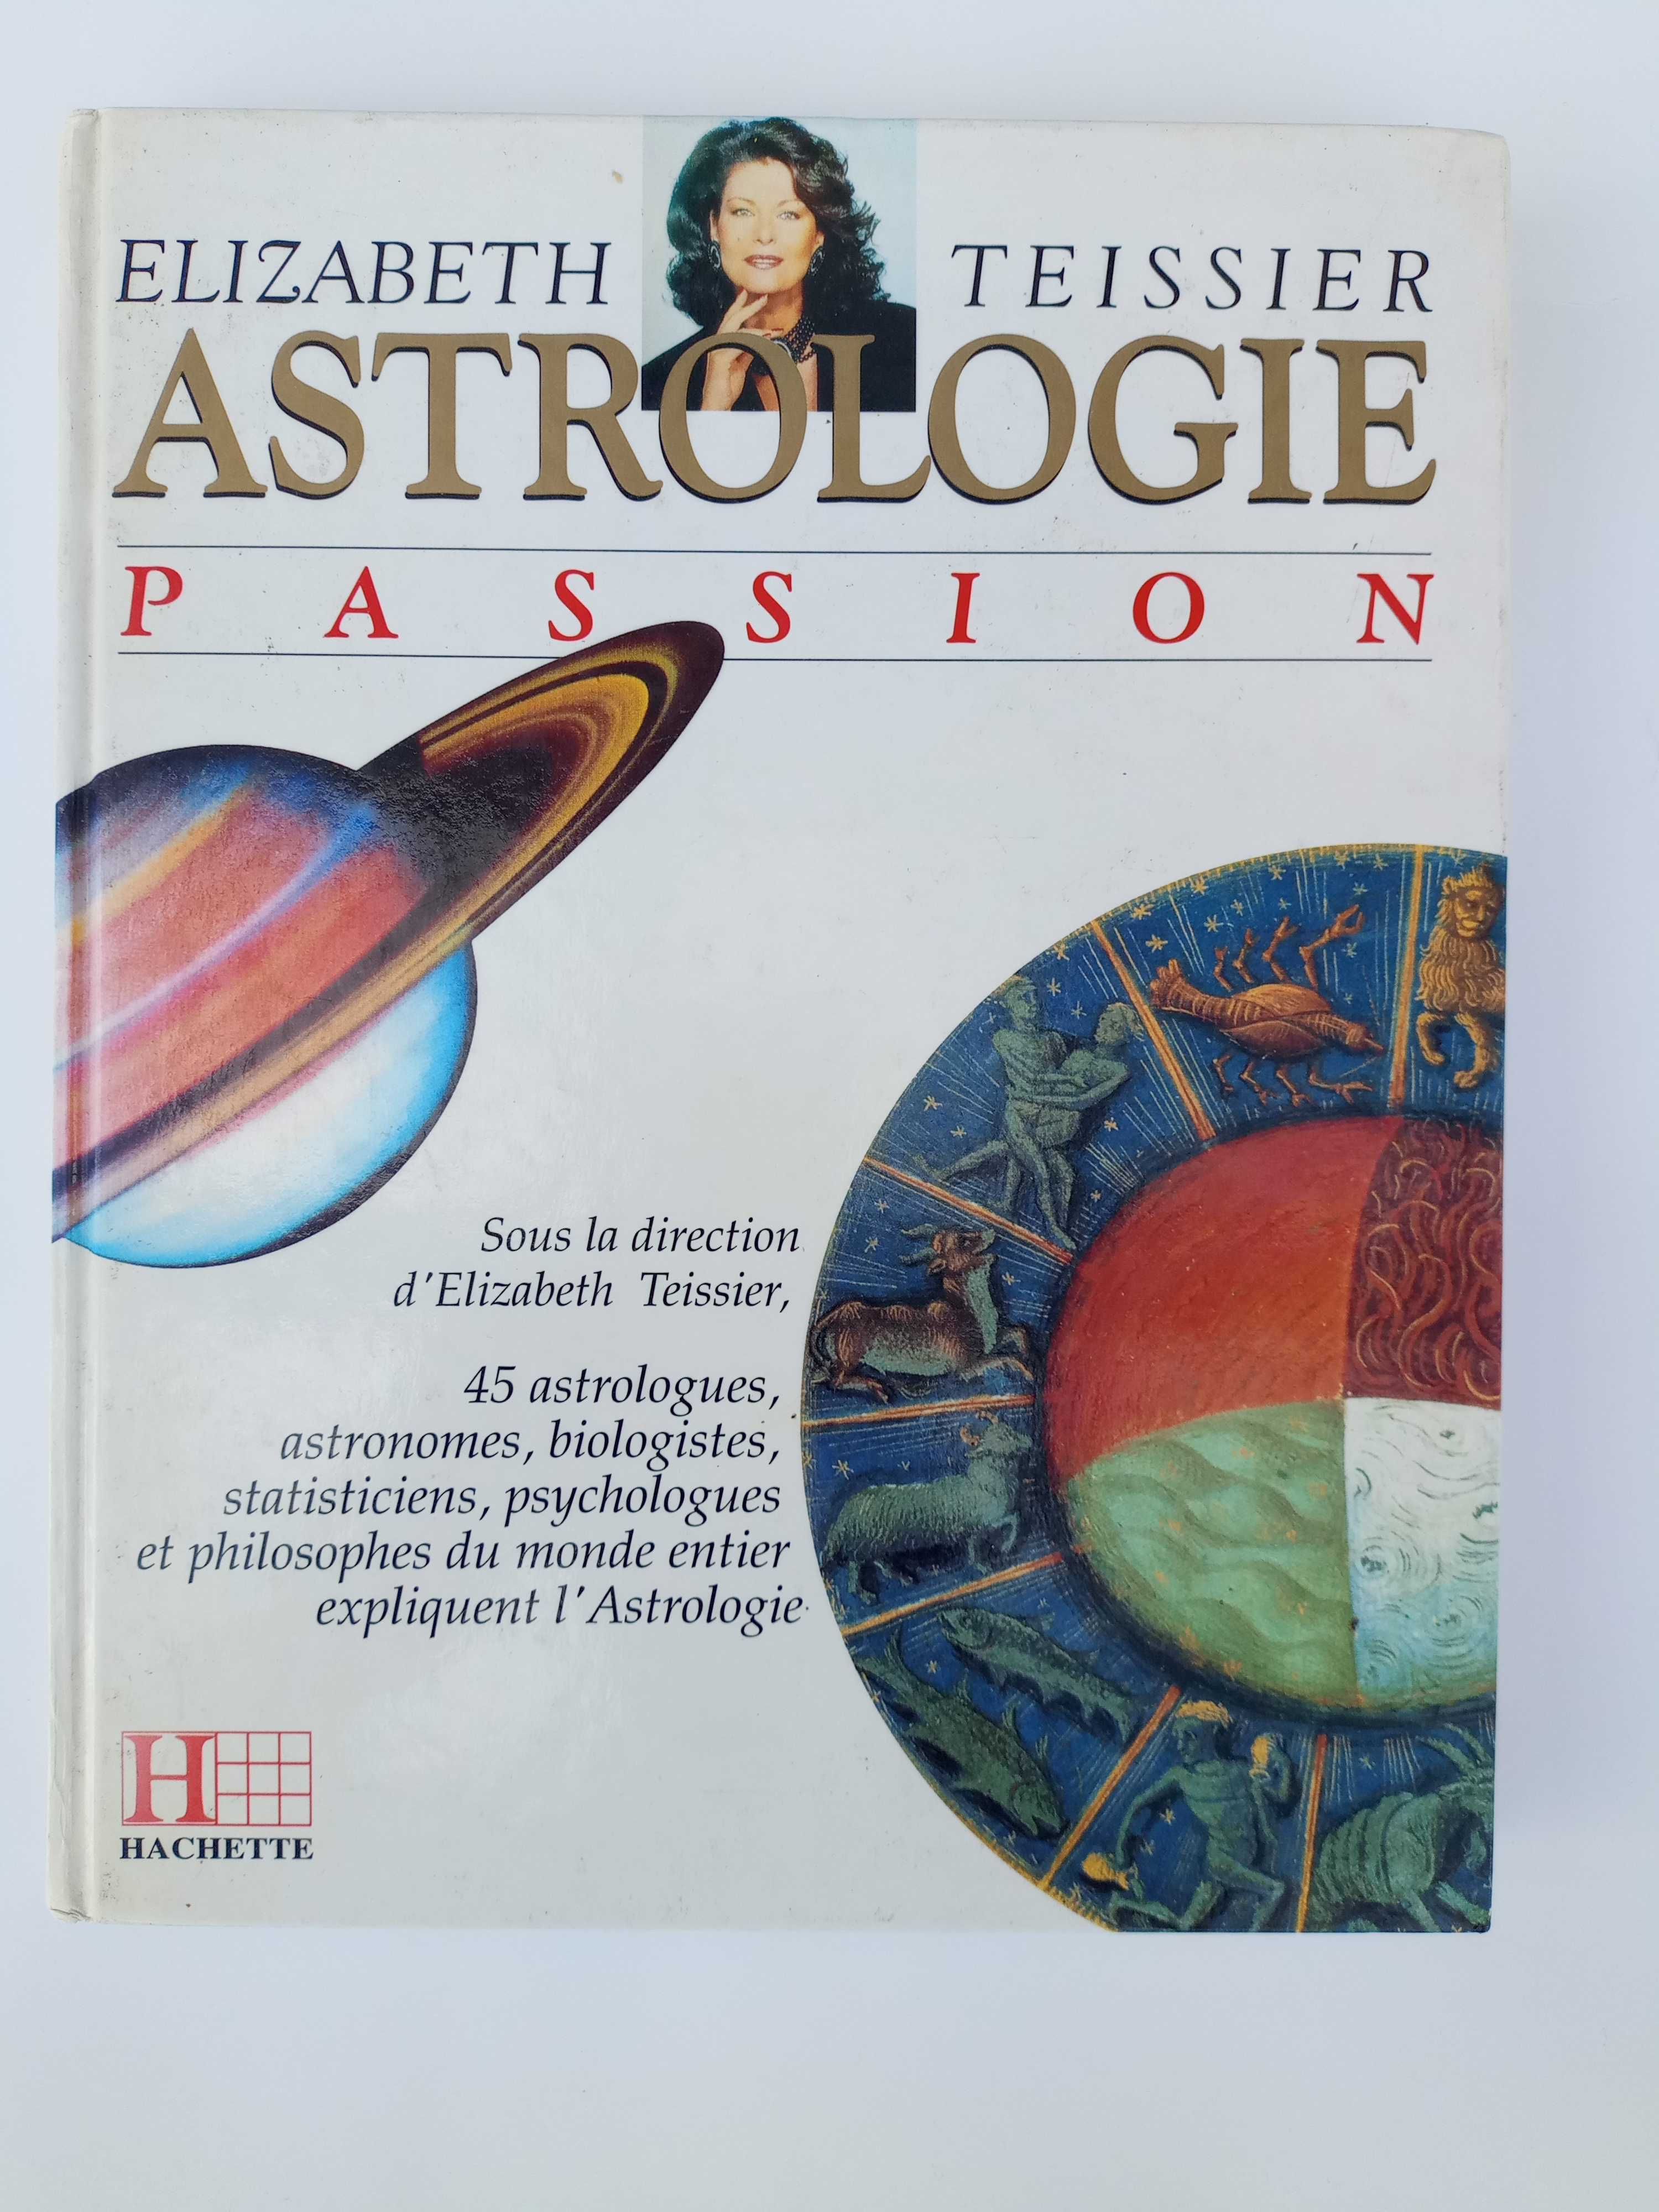 Astrologia - Astrologie Passion